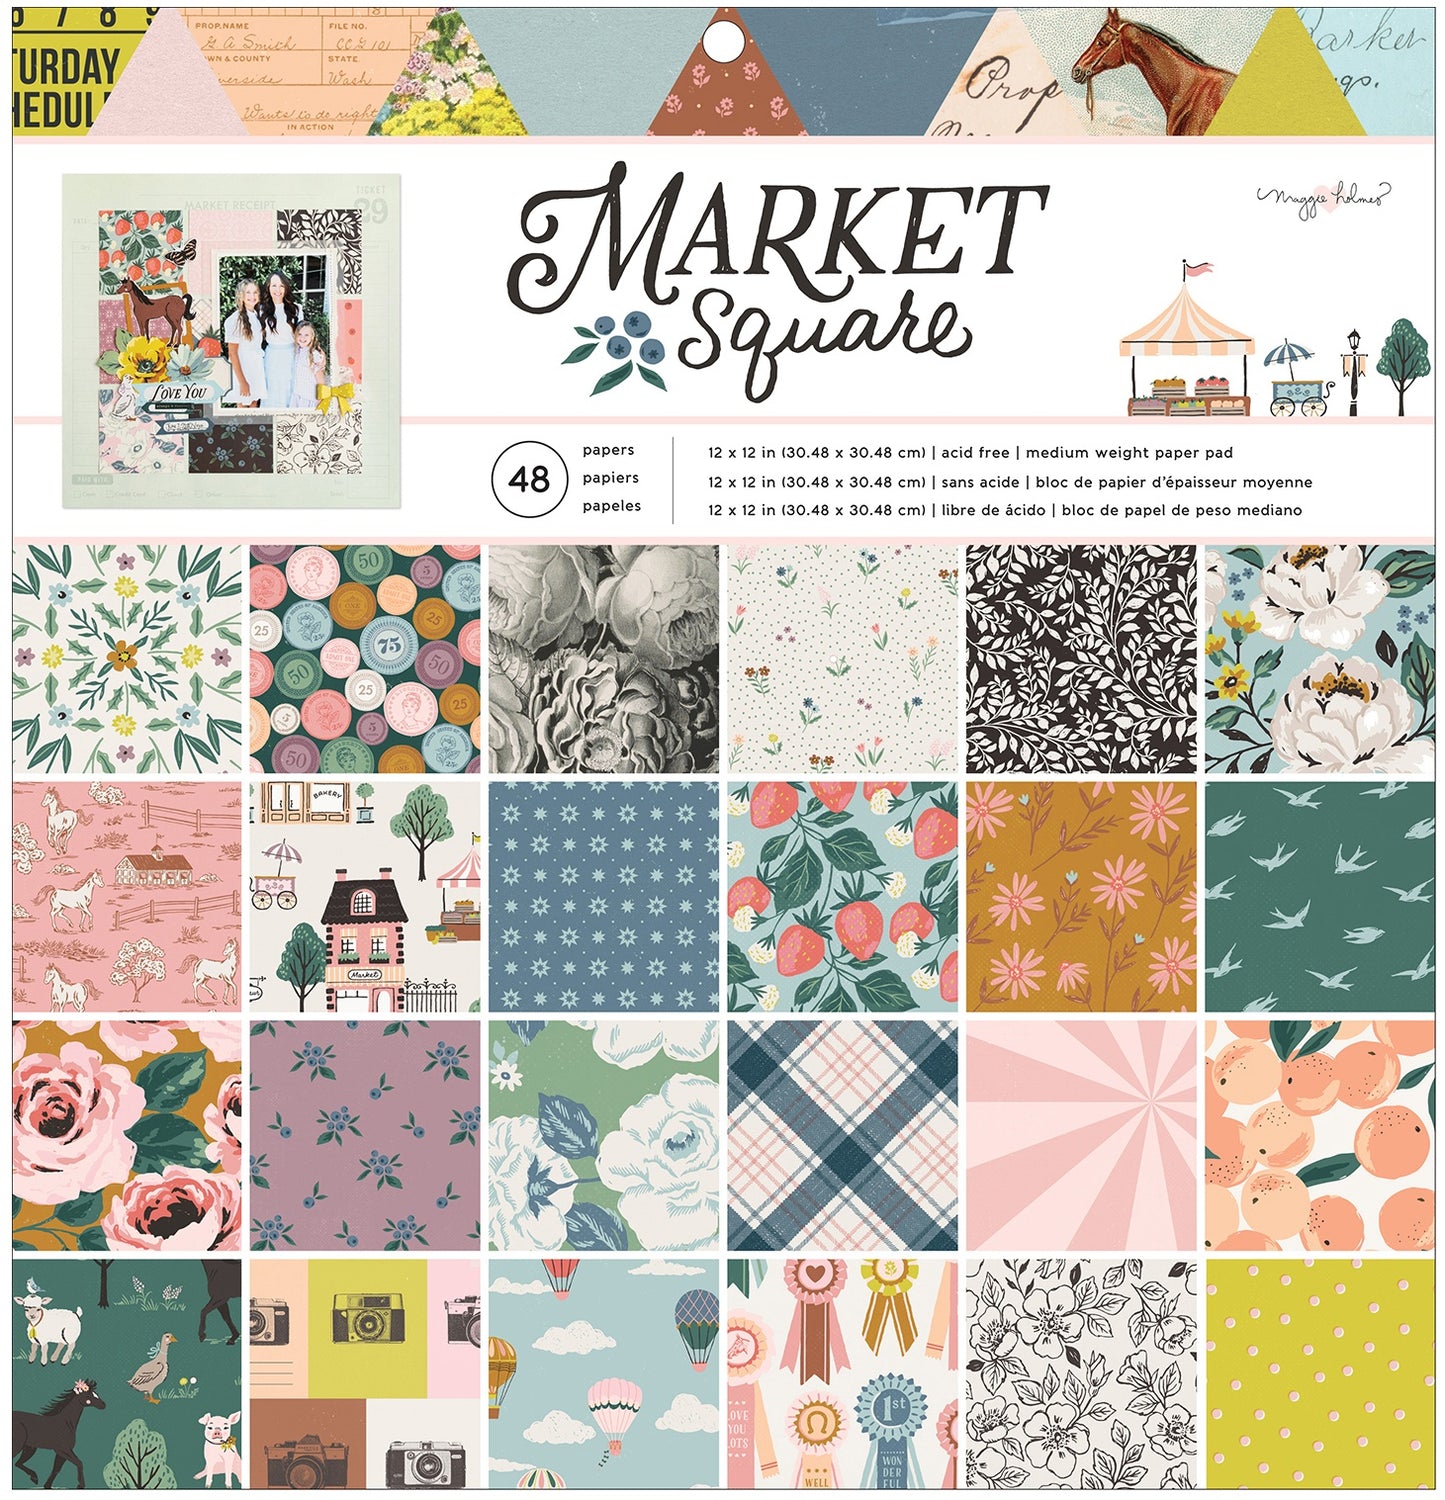 American Crafts Single-Sided Paper Pad 12"X12" 48/Pkg-Maggie Holmes Market Square